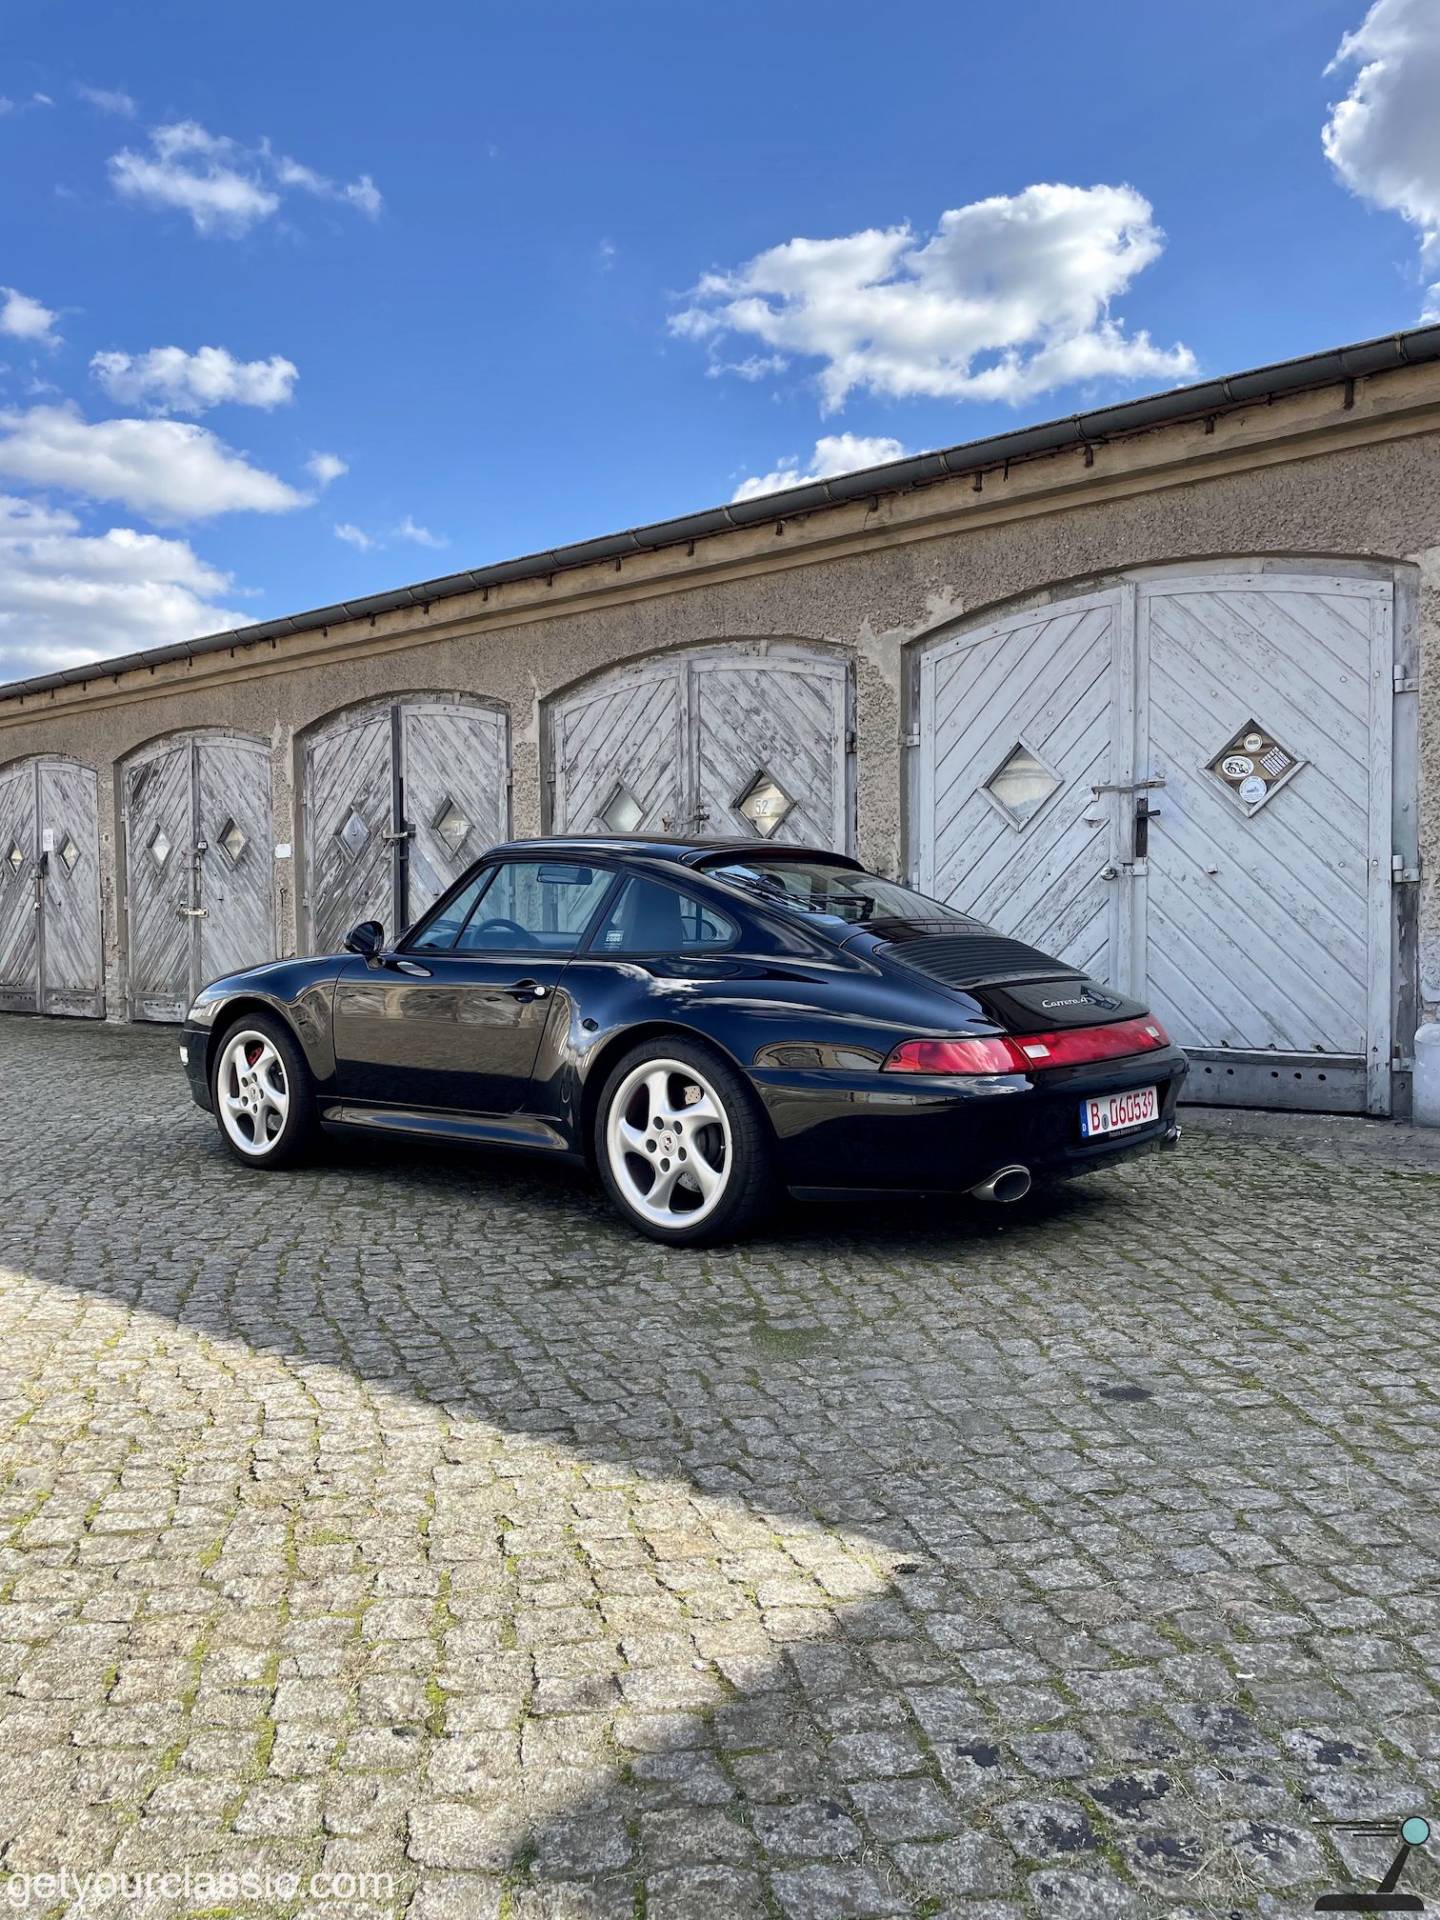 For Sale: Porsche 911 Carrera 4S (1997) offered for GBP 78,745